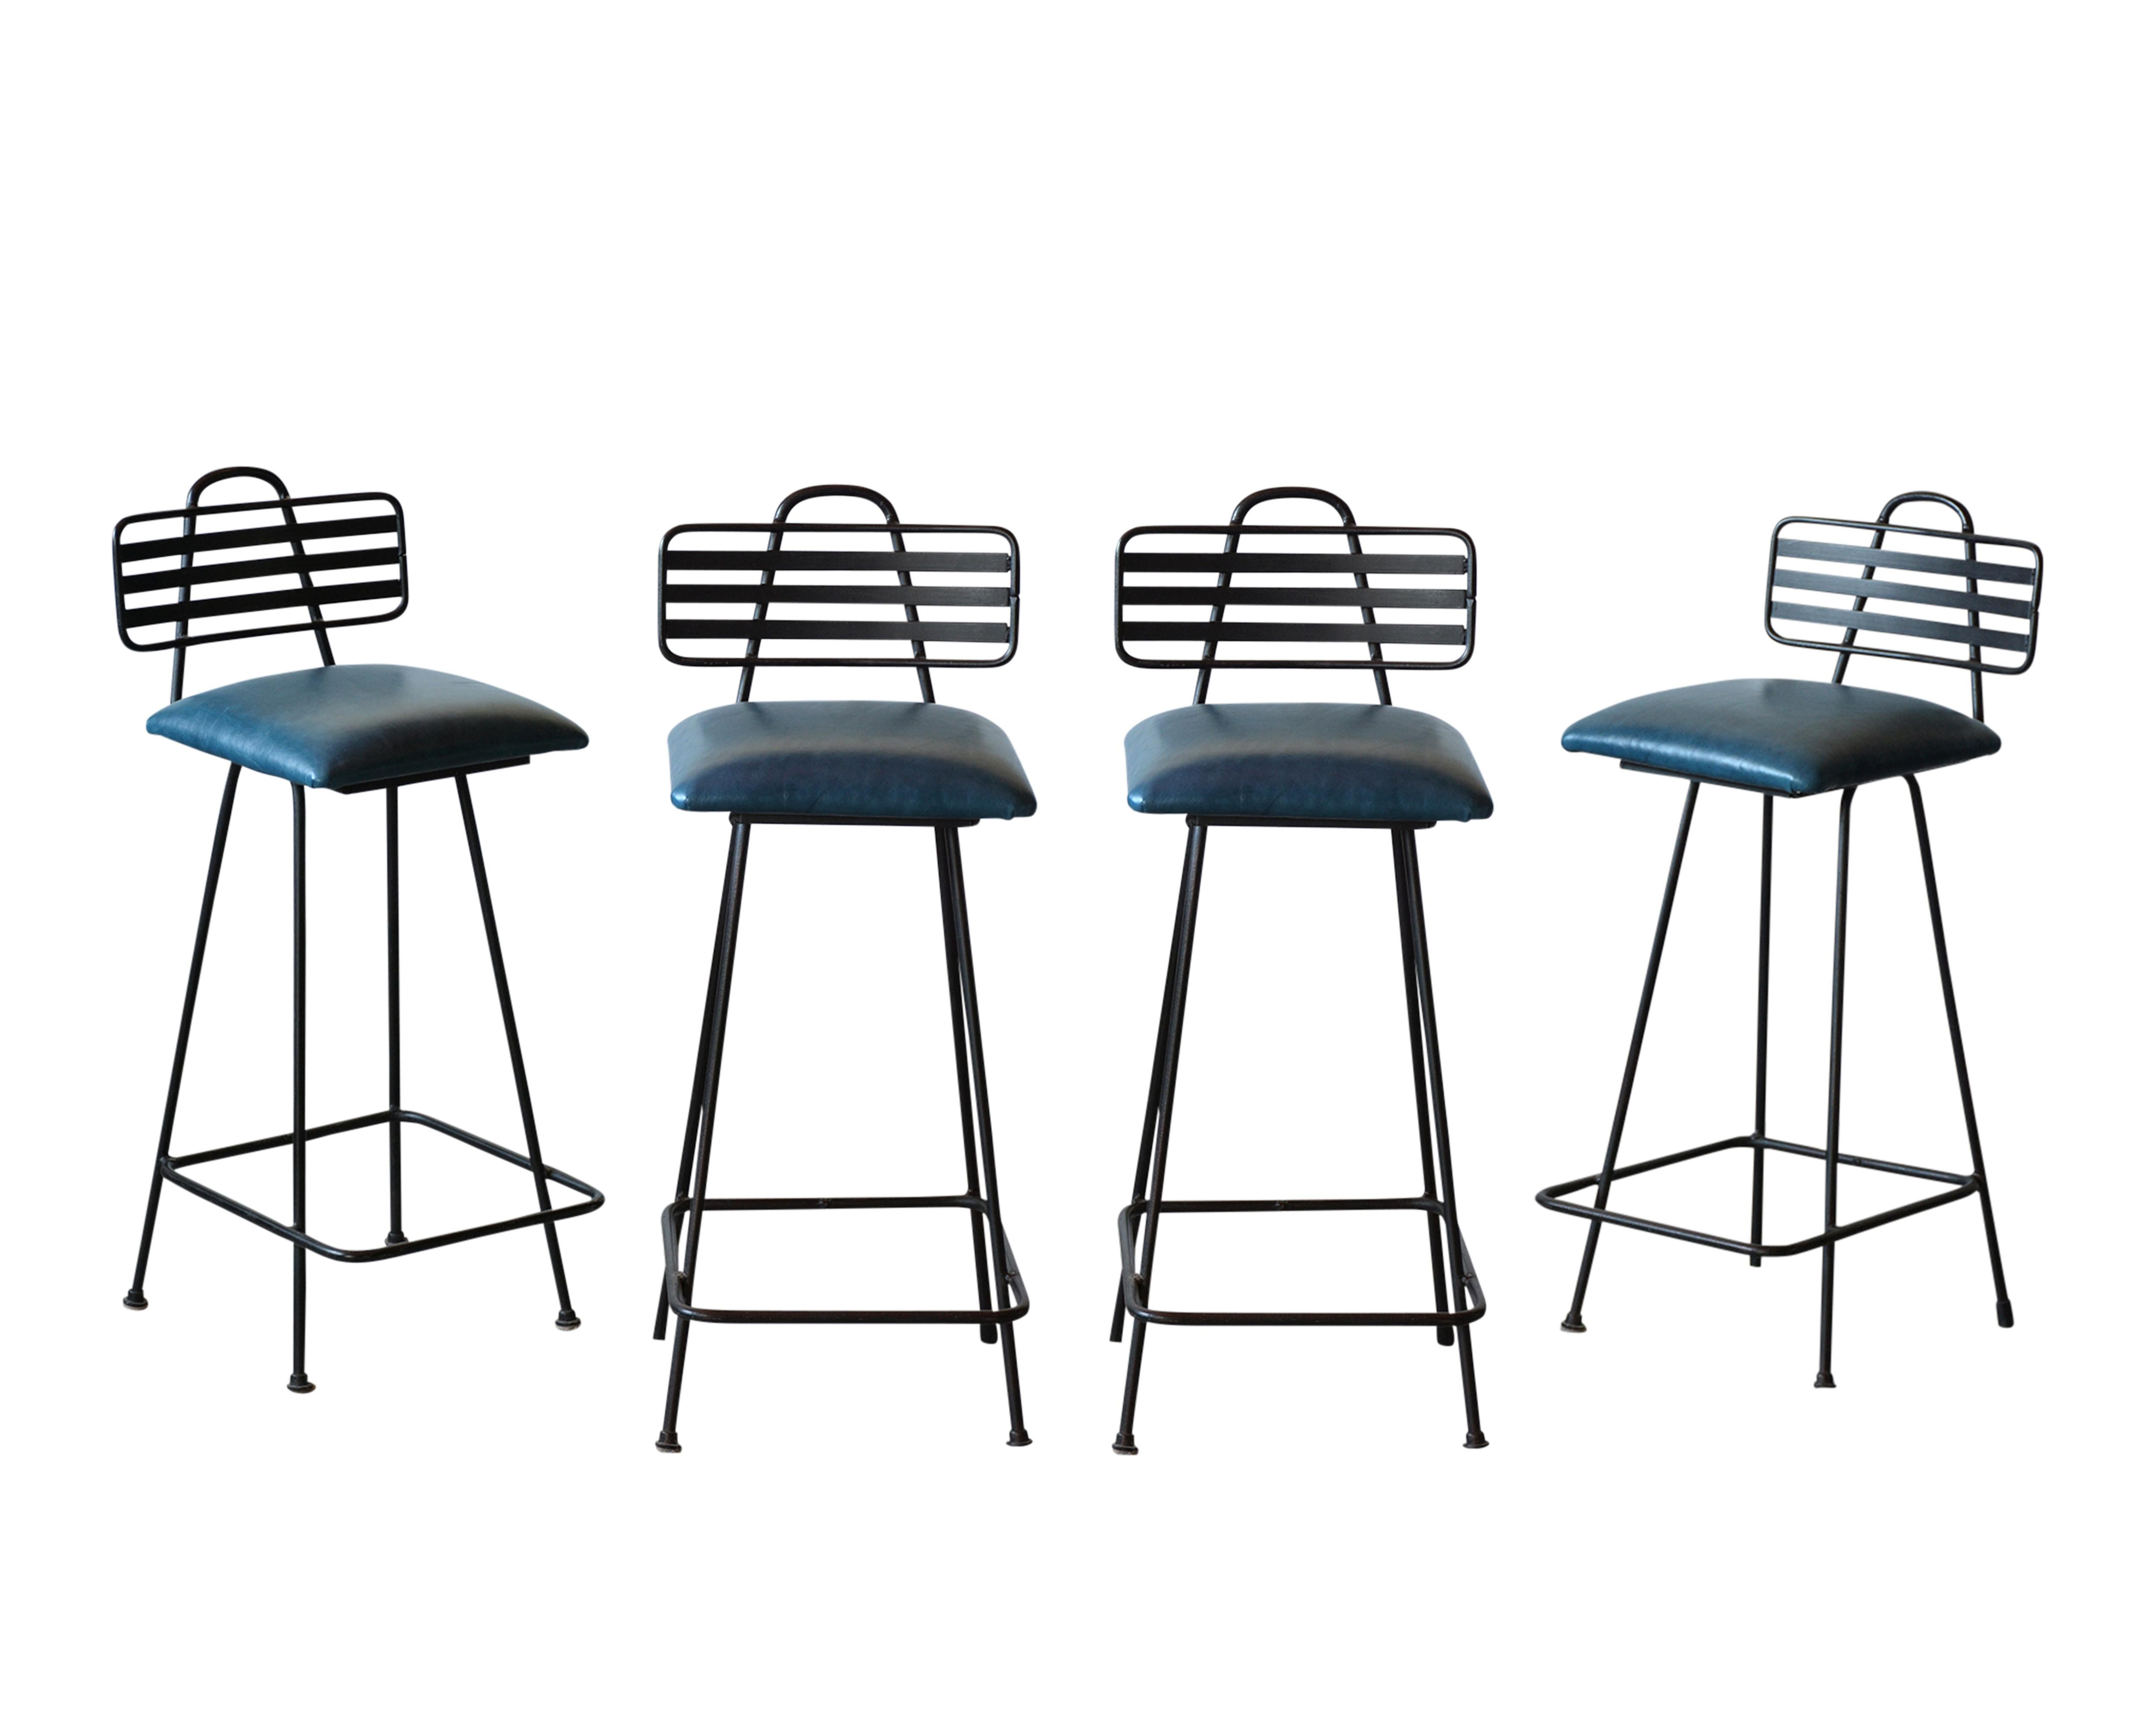 These Four Mid-Century Leather Bar Stools are made out of wrought-iron, feature a Harpin backrest design, and rest on stretched legs frame newly painted in black color. The seats have all been upholstery in blue color leather with new comfortable